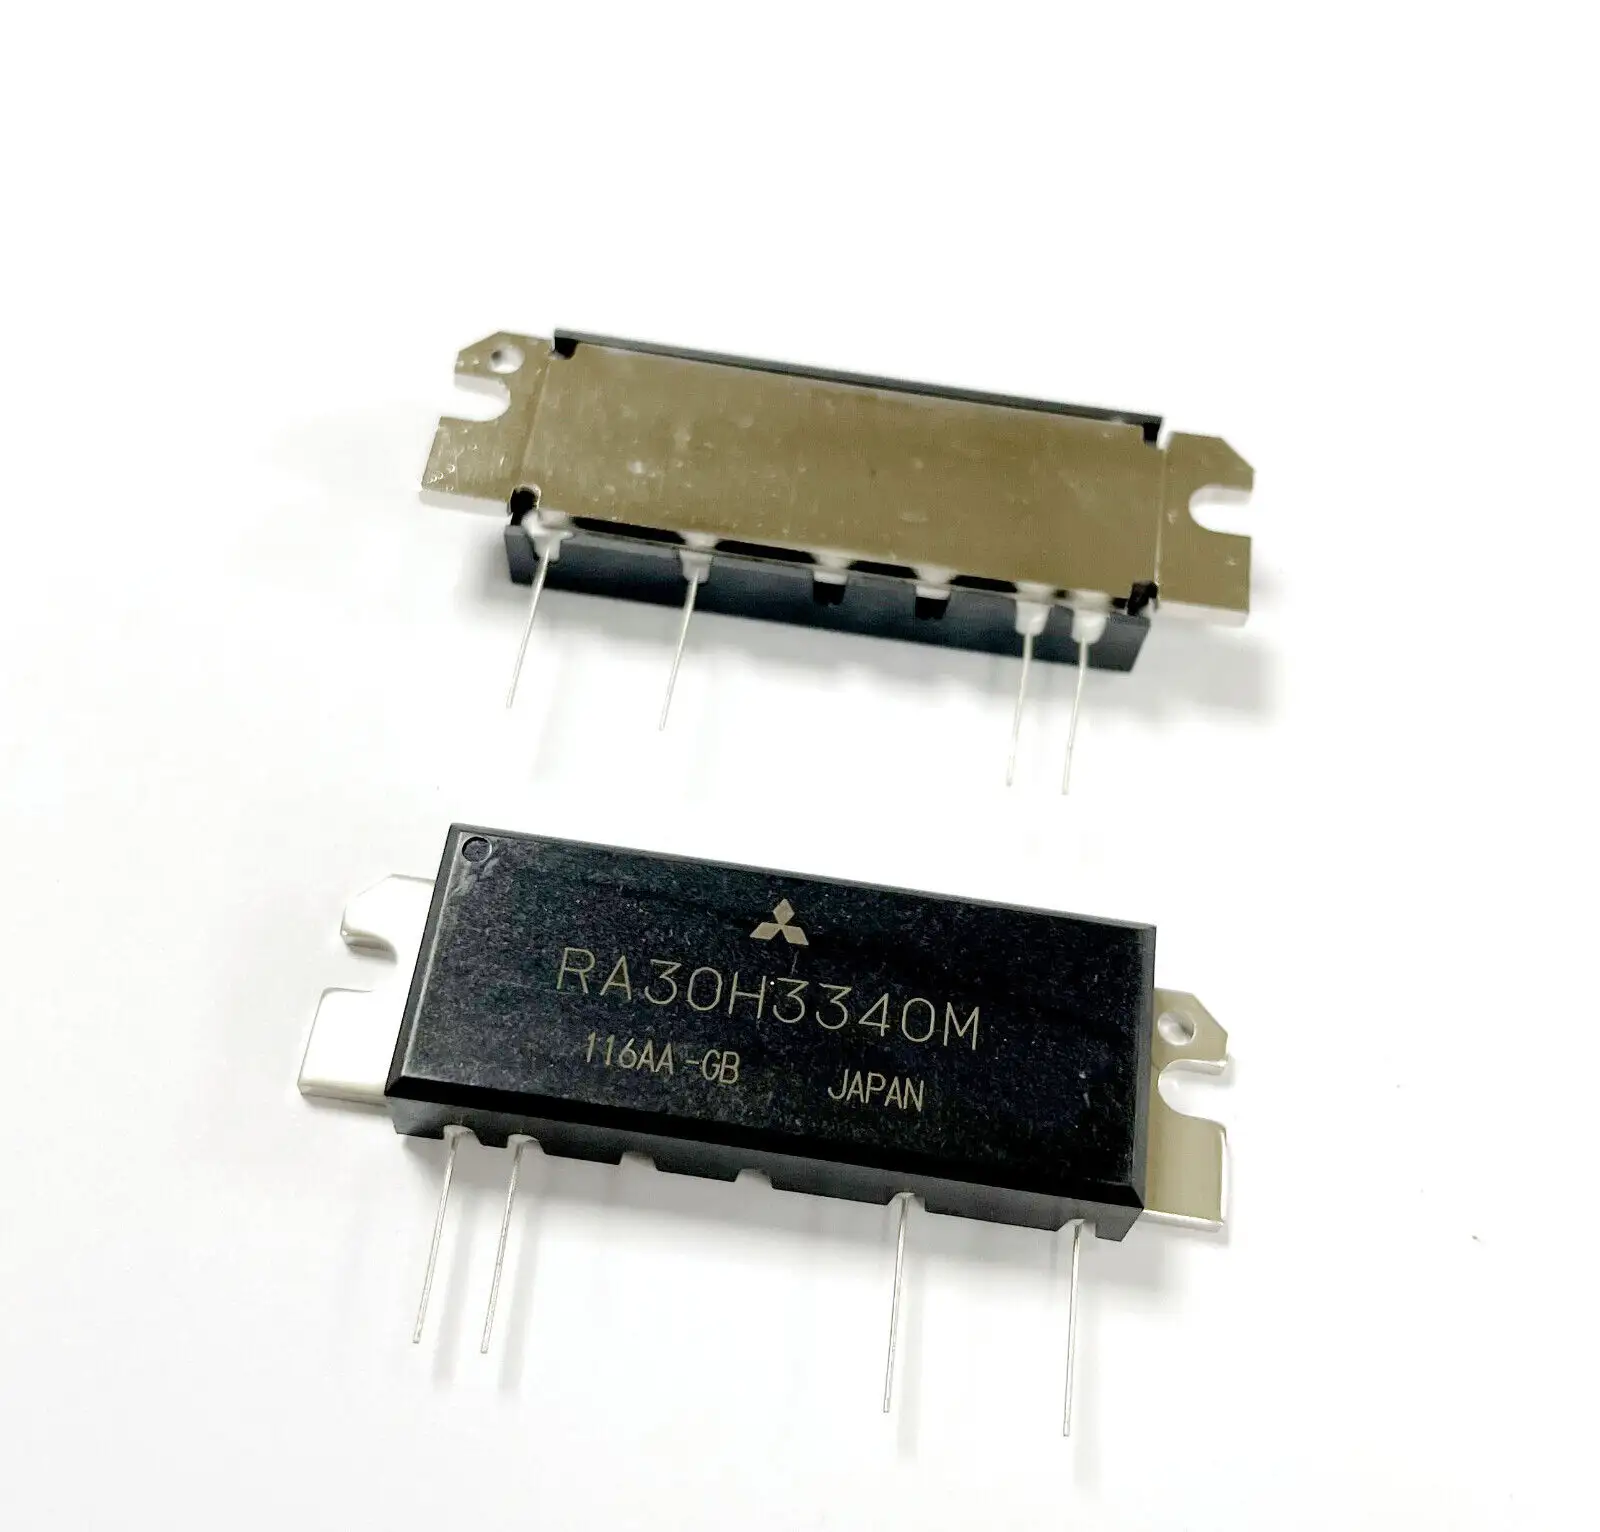 RA30H3340M RA30H3340M1 330-400MHz 30W 12.5V, 3 Stage Amp. For MOBILE RADIO Power amplification module New and original